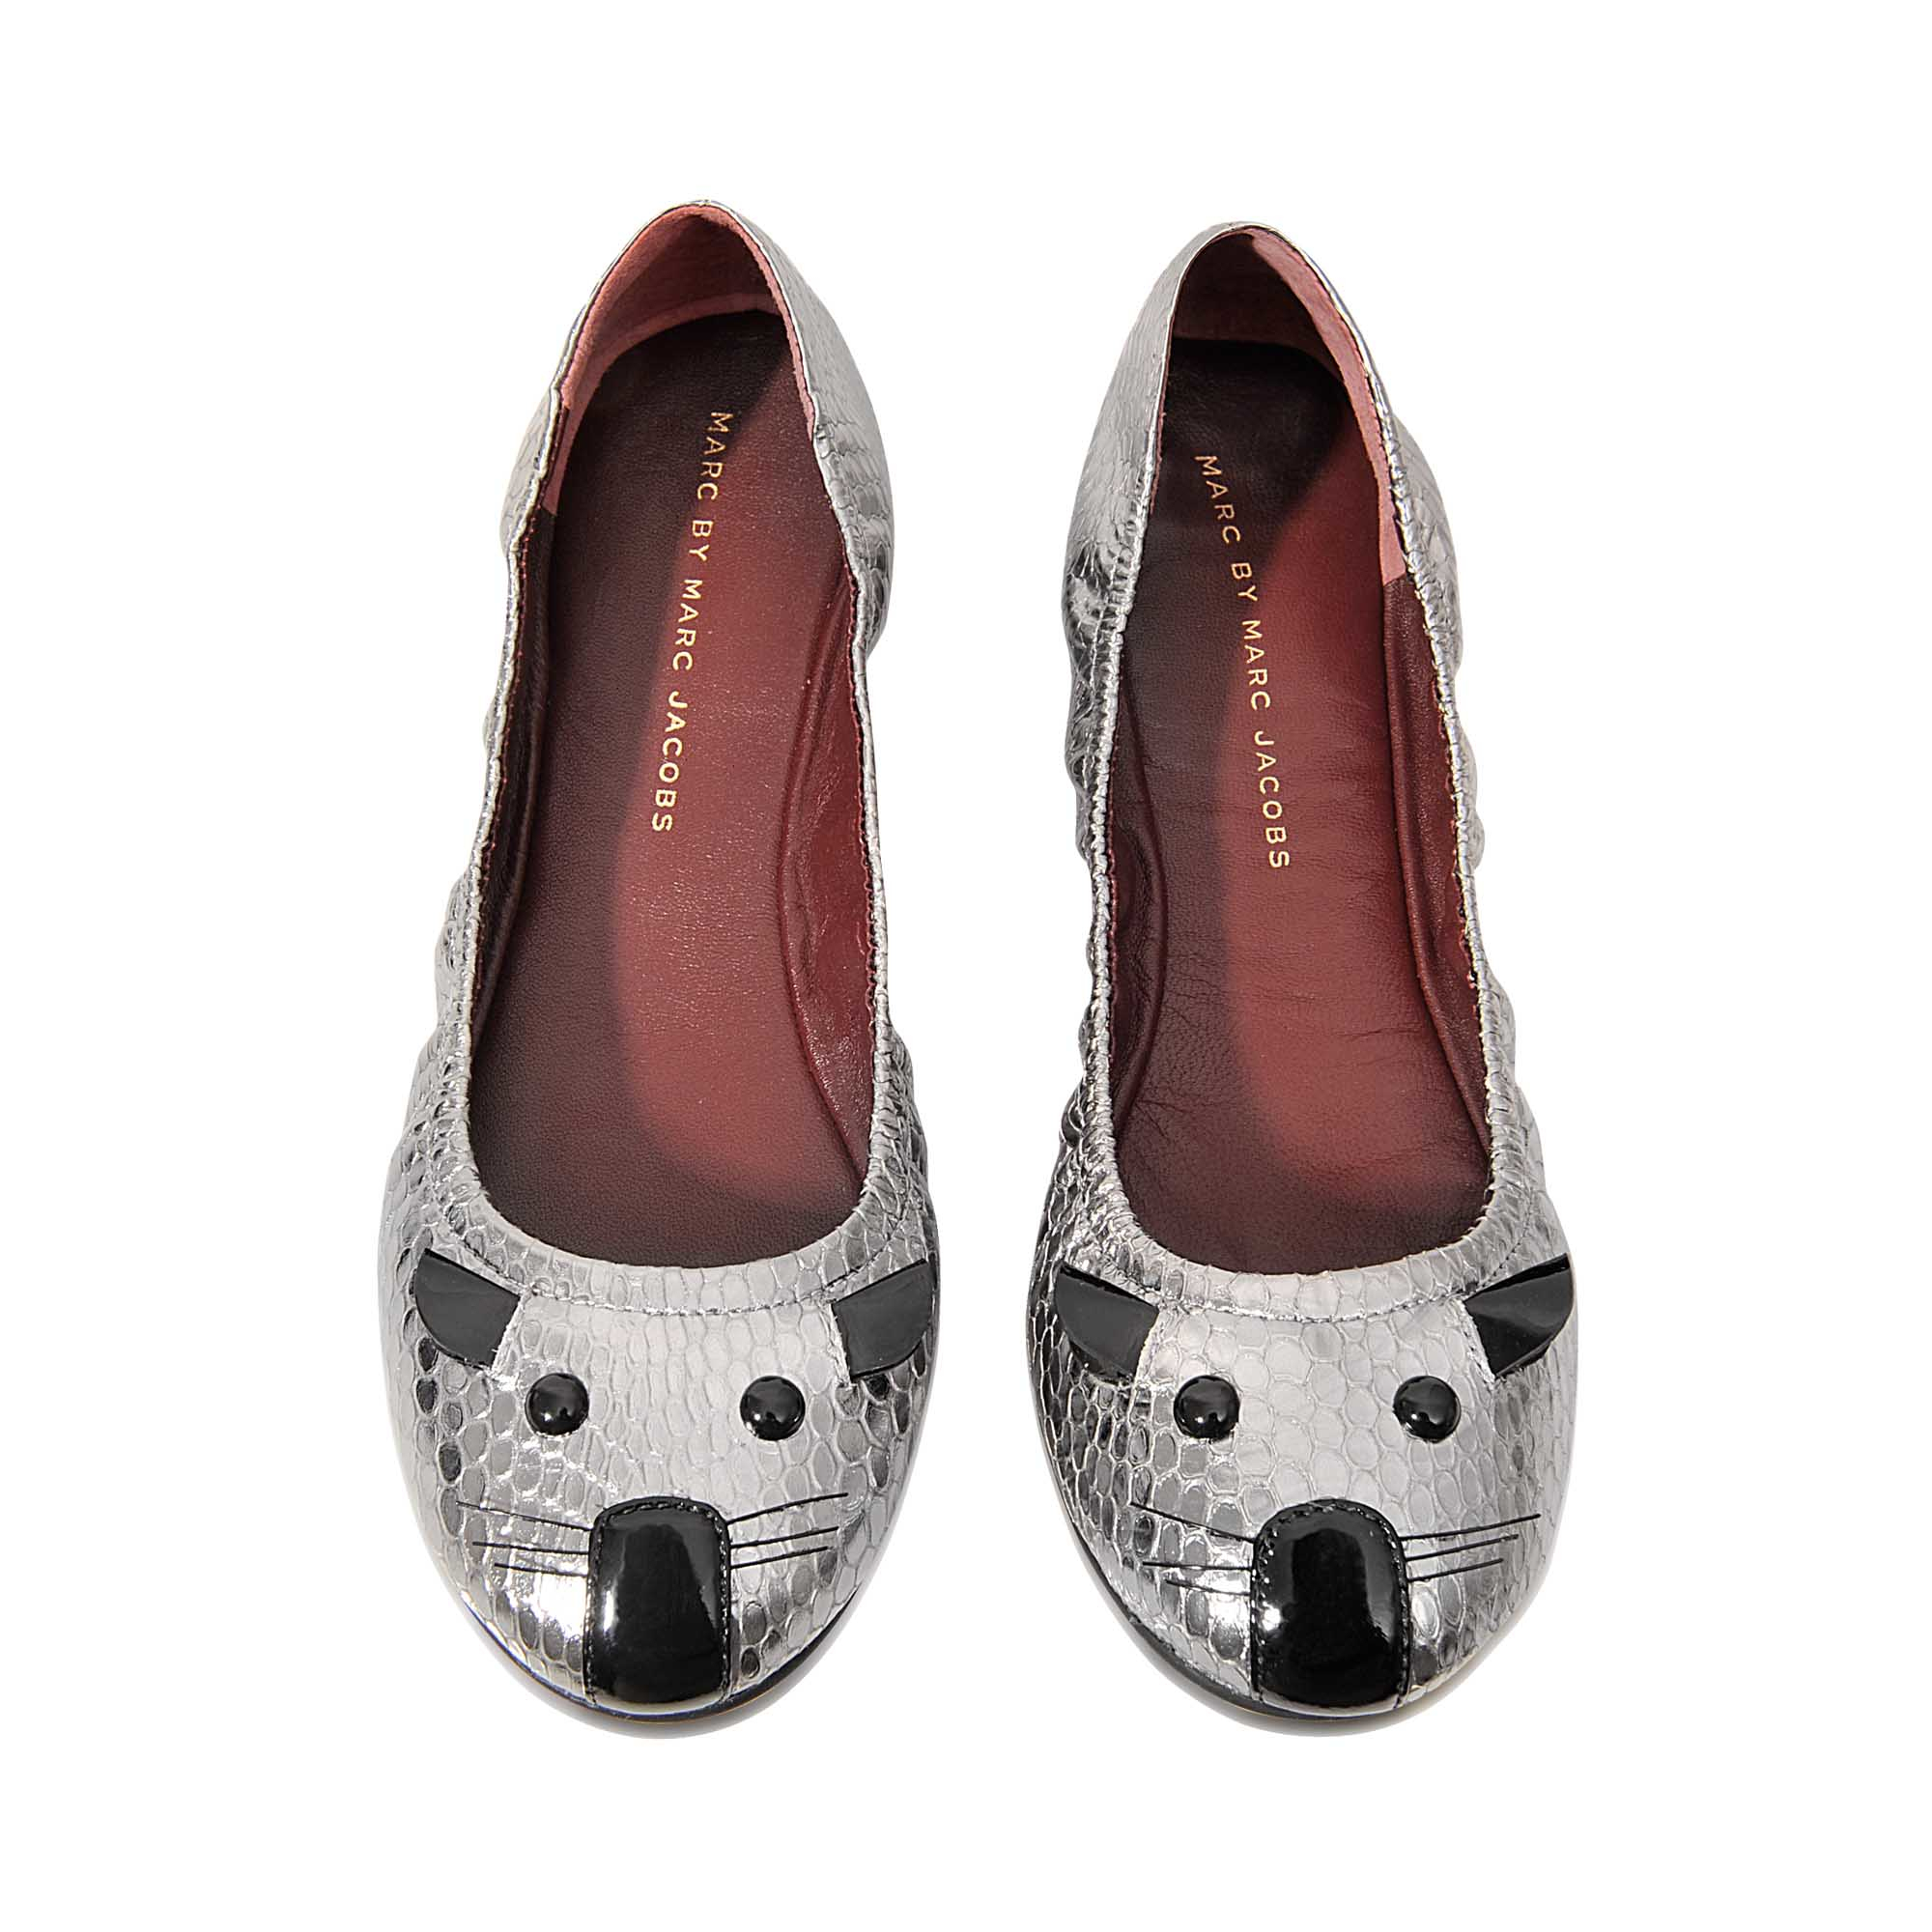 marc by marc jacobs ballet flats